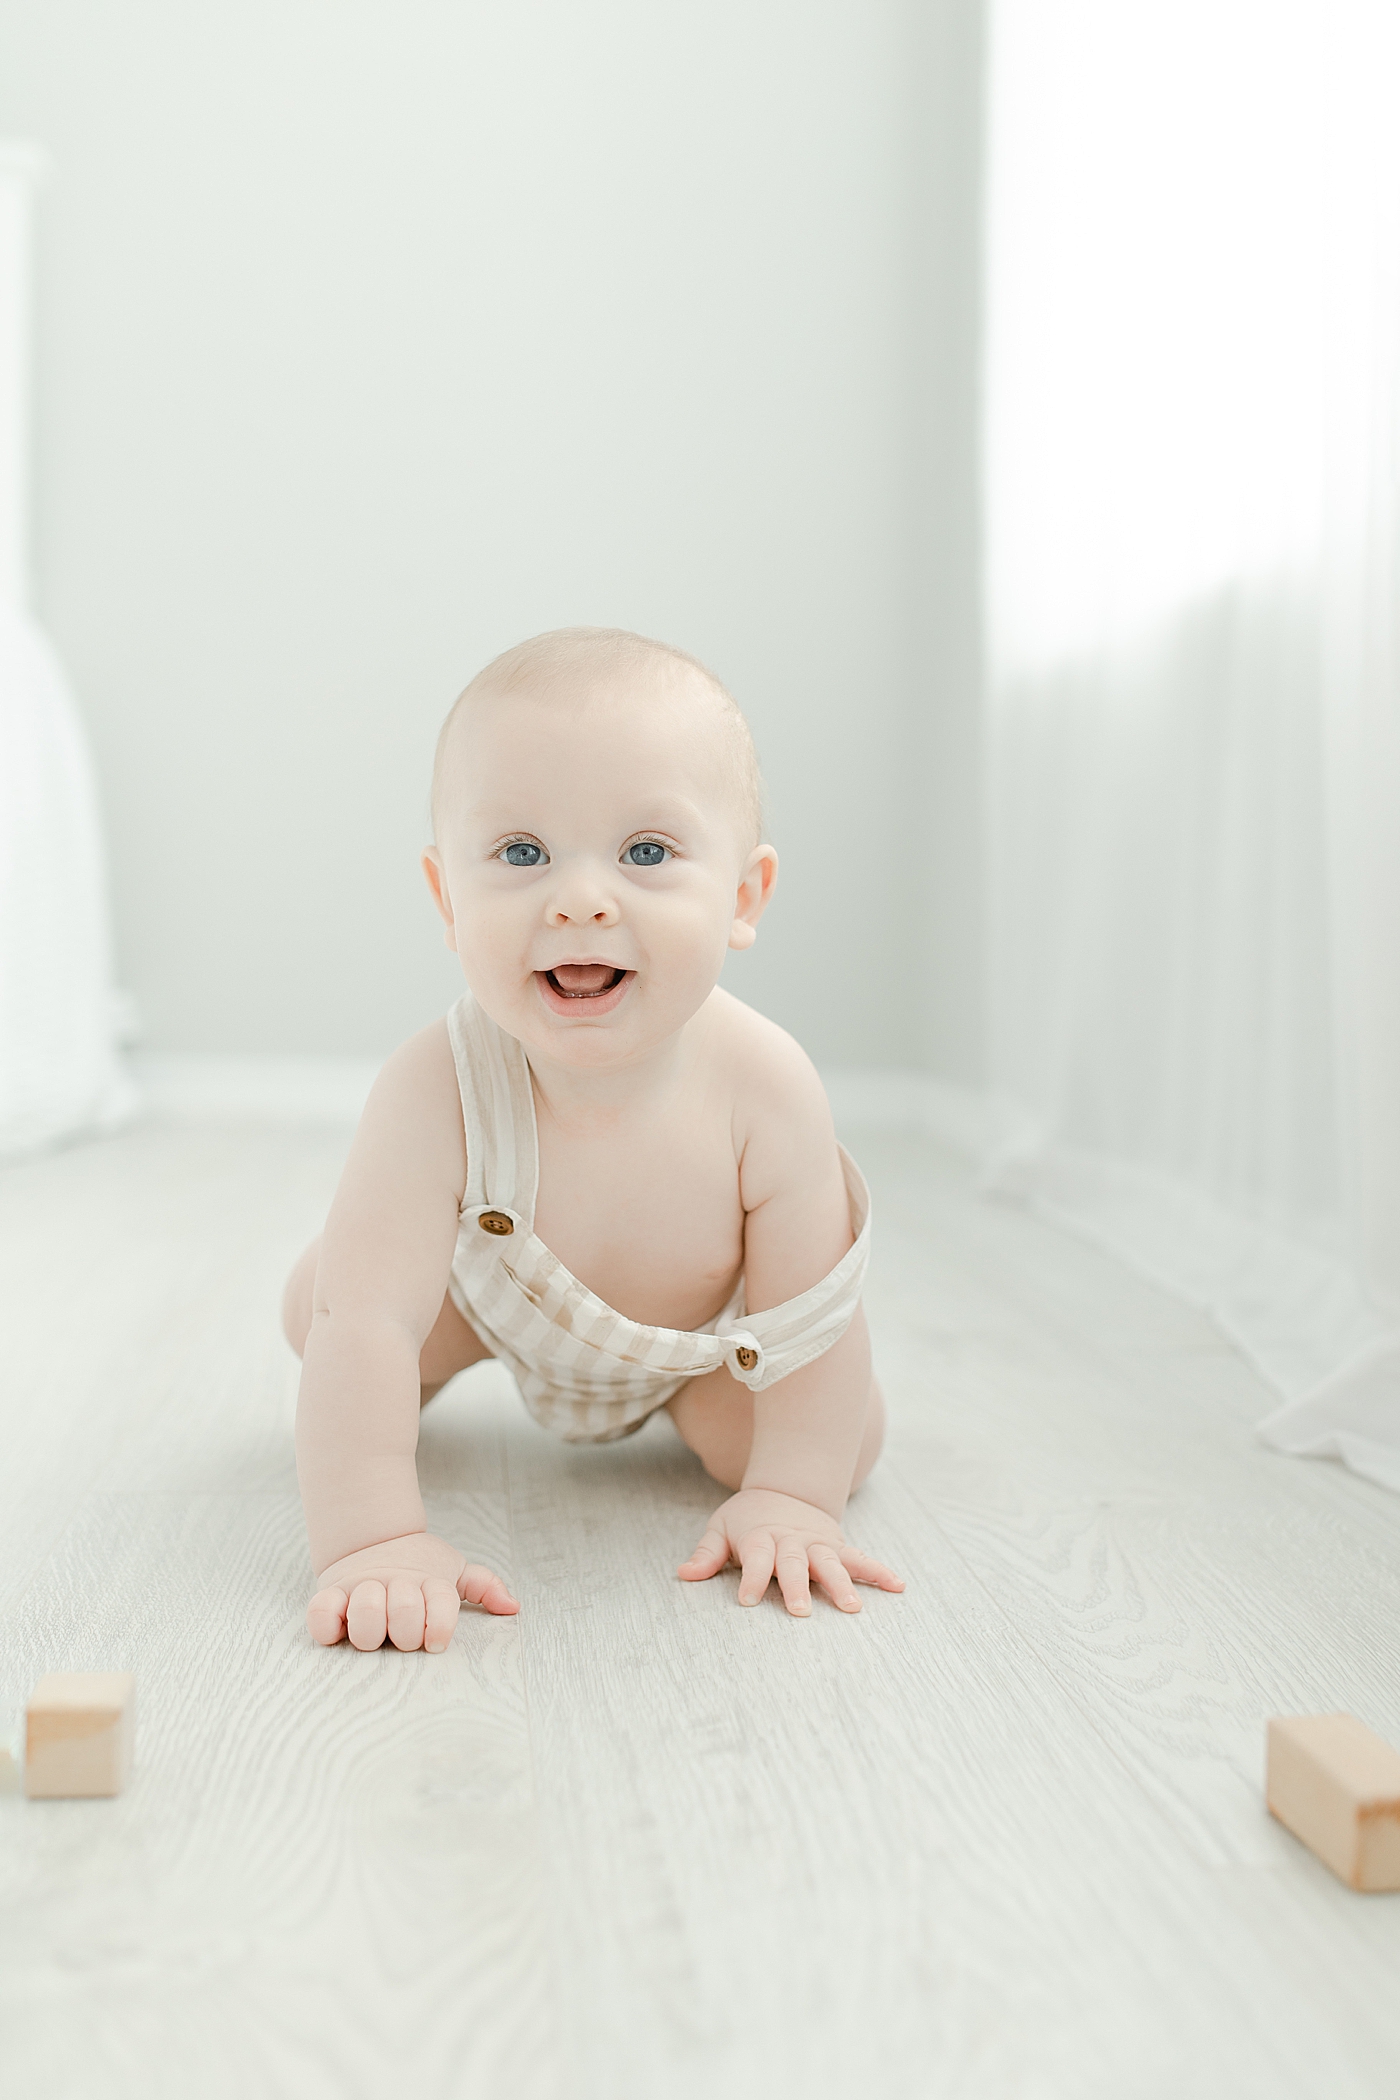 Baby boy in striped overalls smiling while crawling | Photo by Hattiesburg Baby Photographer Little Sunshine Photography